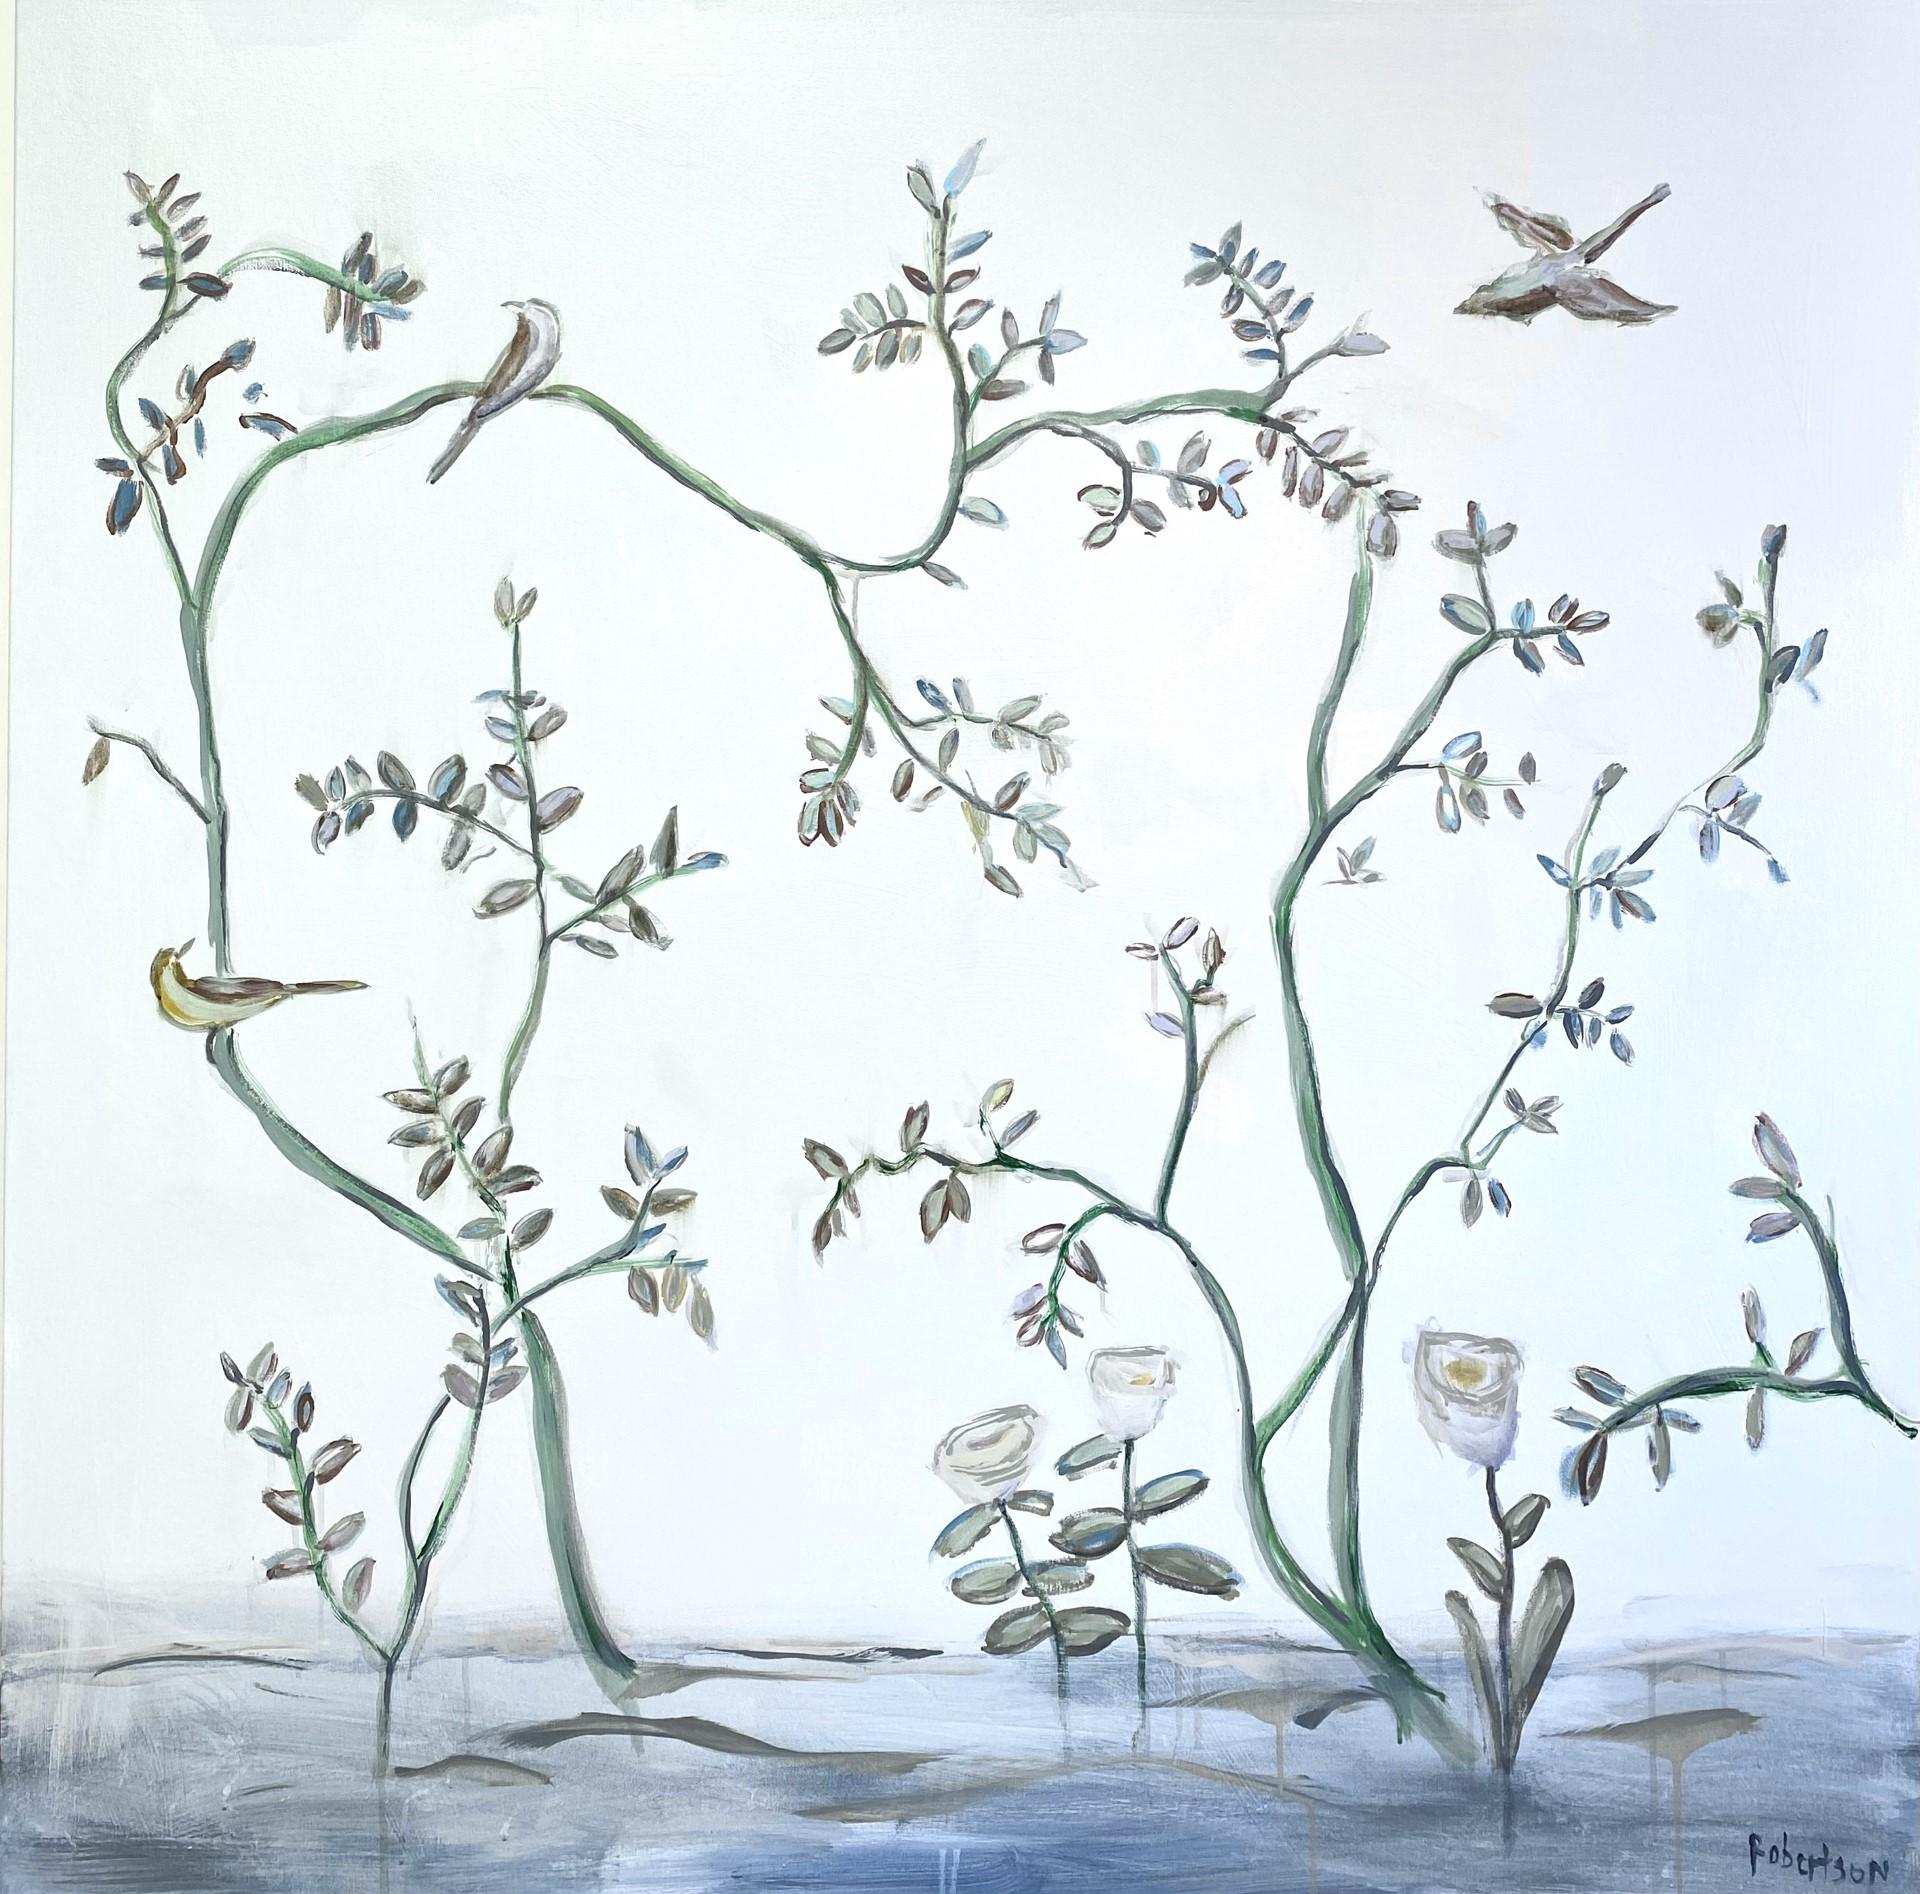 Morning Birds by Sarah Robertson, Large Square Mixed Media Floral Painting